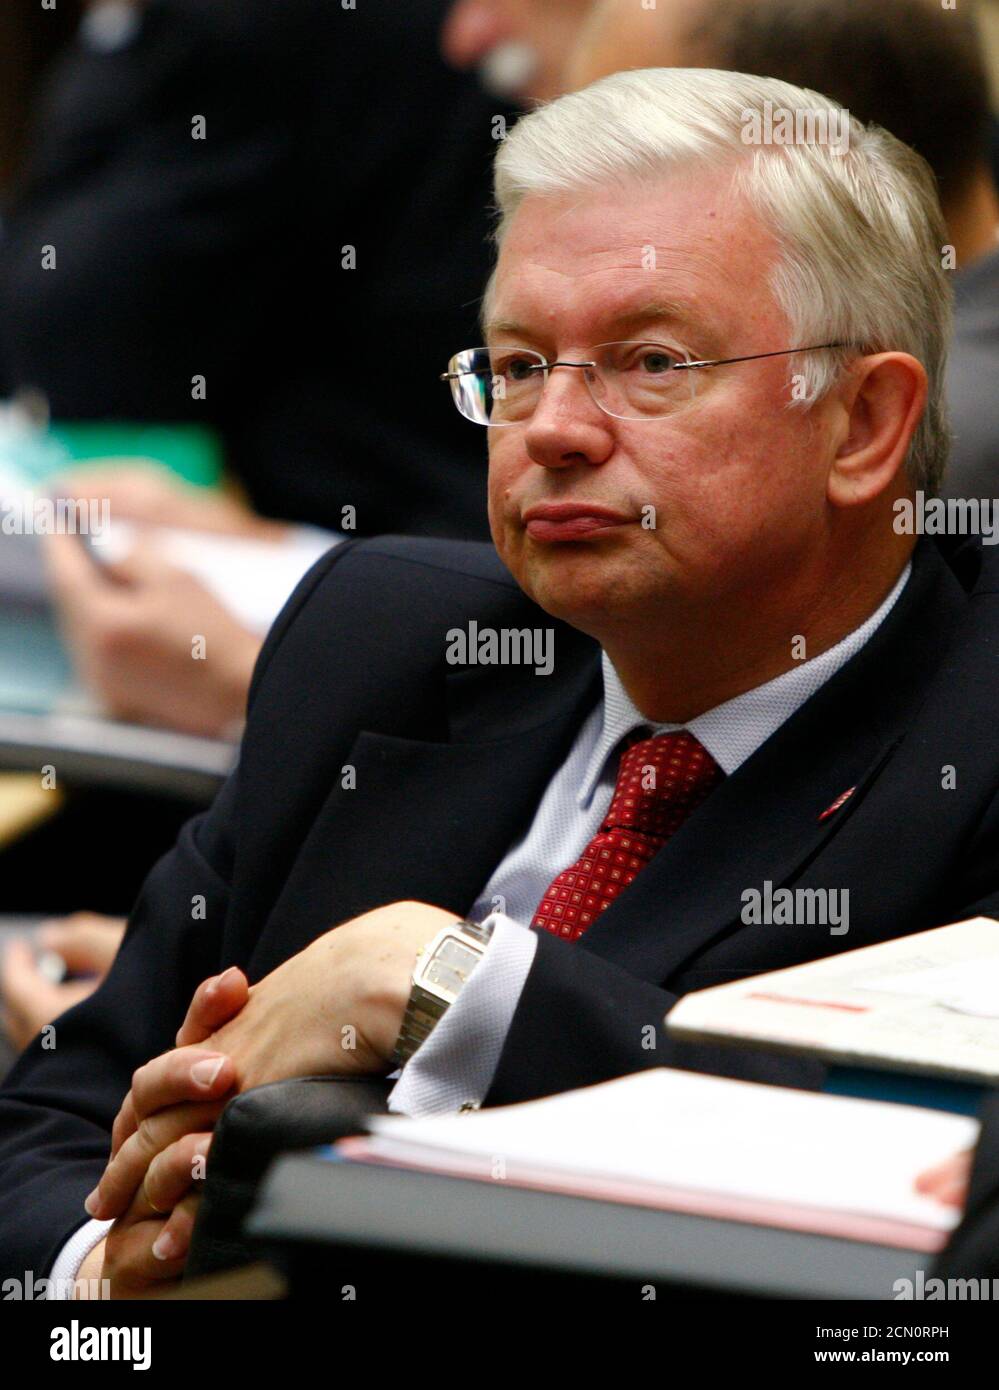 Hesse state premier Roland Koch attends a session of the Bundesrat, the German upper house of Parliament, in Berlin July 10, 2009.   REUTERS/Thomas Peter   (GERMANY POLITICS) Stock Photo